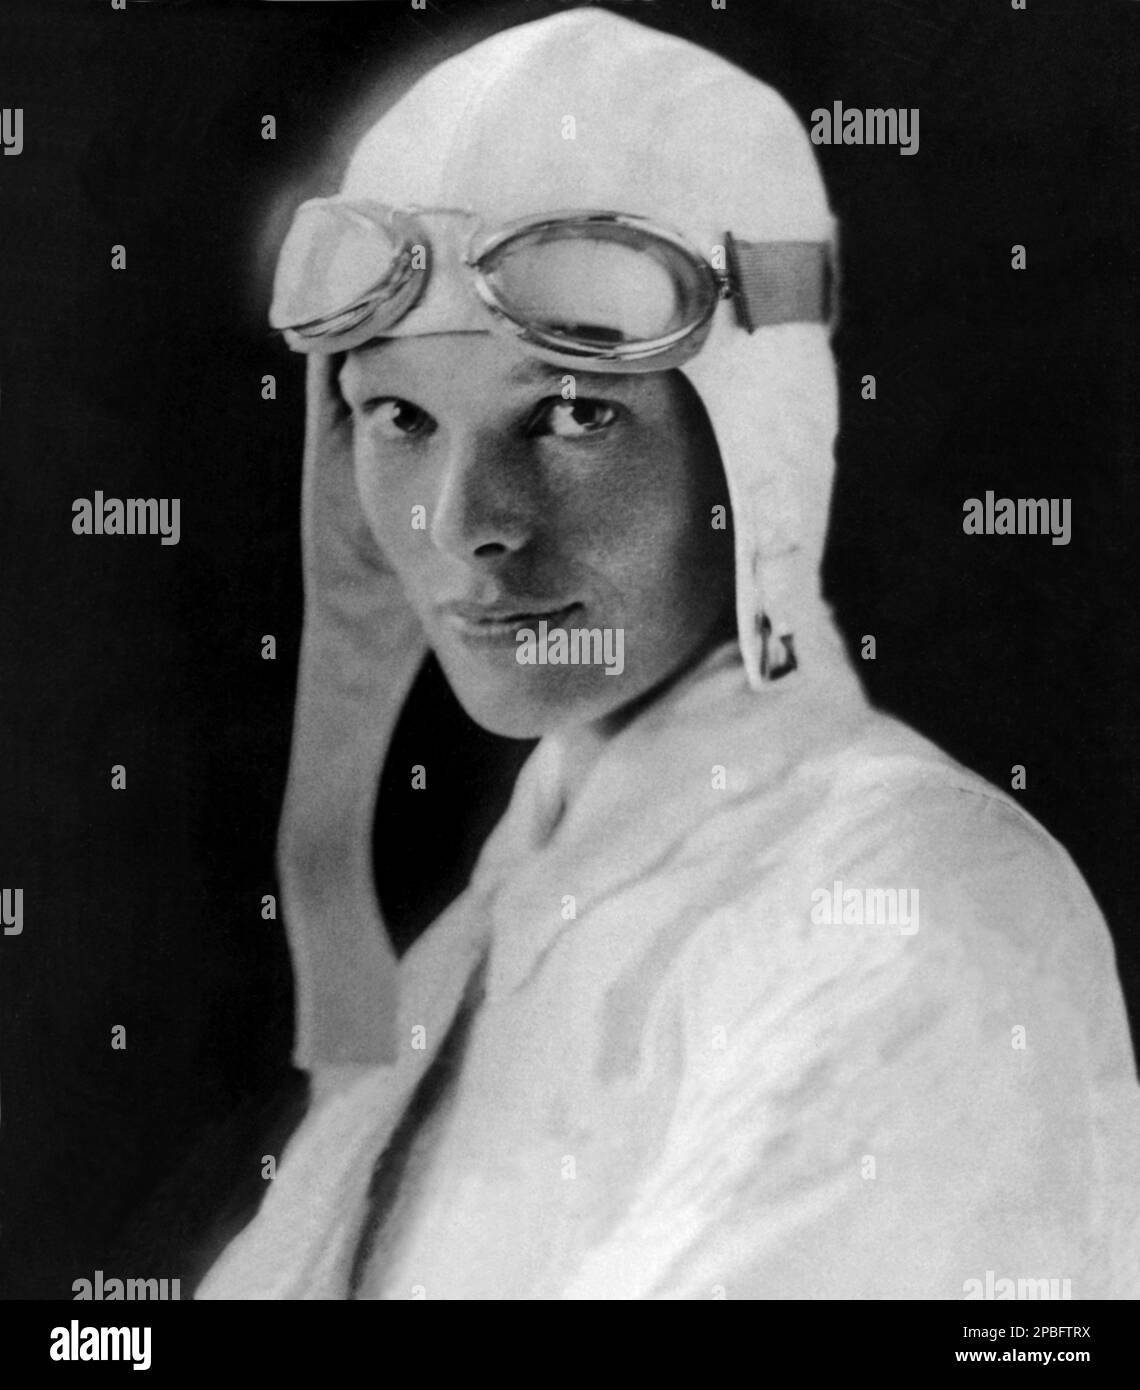 1926 ca , USA  :  Portraits of  most celebrated woman aviator AMELIA EARHART ( 1897 - 1937 ) . Earhart was the first woman to receive the Distinguished Flying Cross which she was awarded as the first aviatrix to fly solo across the Atlantic Ocean.  She set many other records, wrote best-selling books about her flying experiences, and was instrumental in the formation of The Ninety-Nines, an organization for female pilots.  During an attempt to make a circumnavigational flight of the globe in 1937, Earhart disappeared over the central Pacific Ocean near Howland Island. Fascination with her life Stock Photo